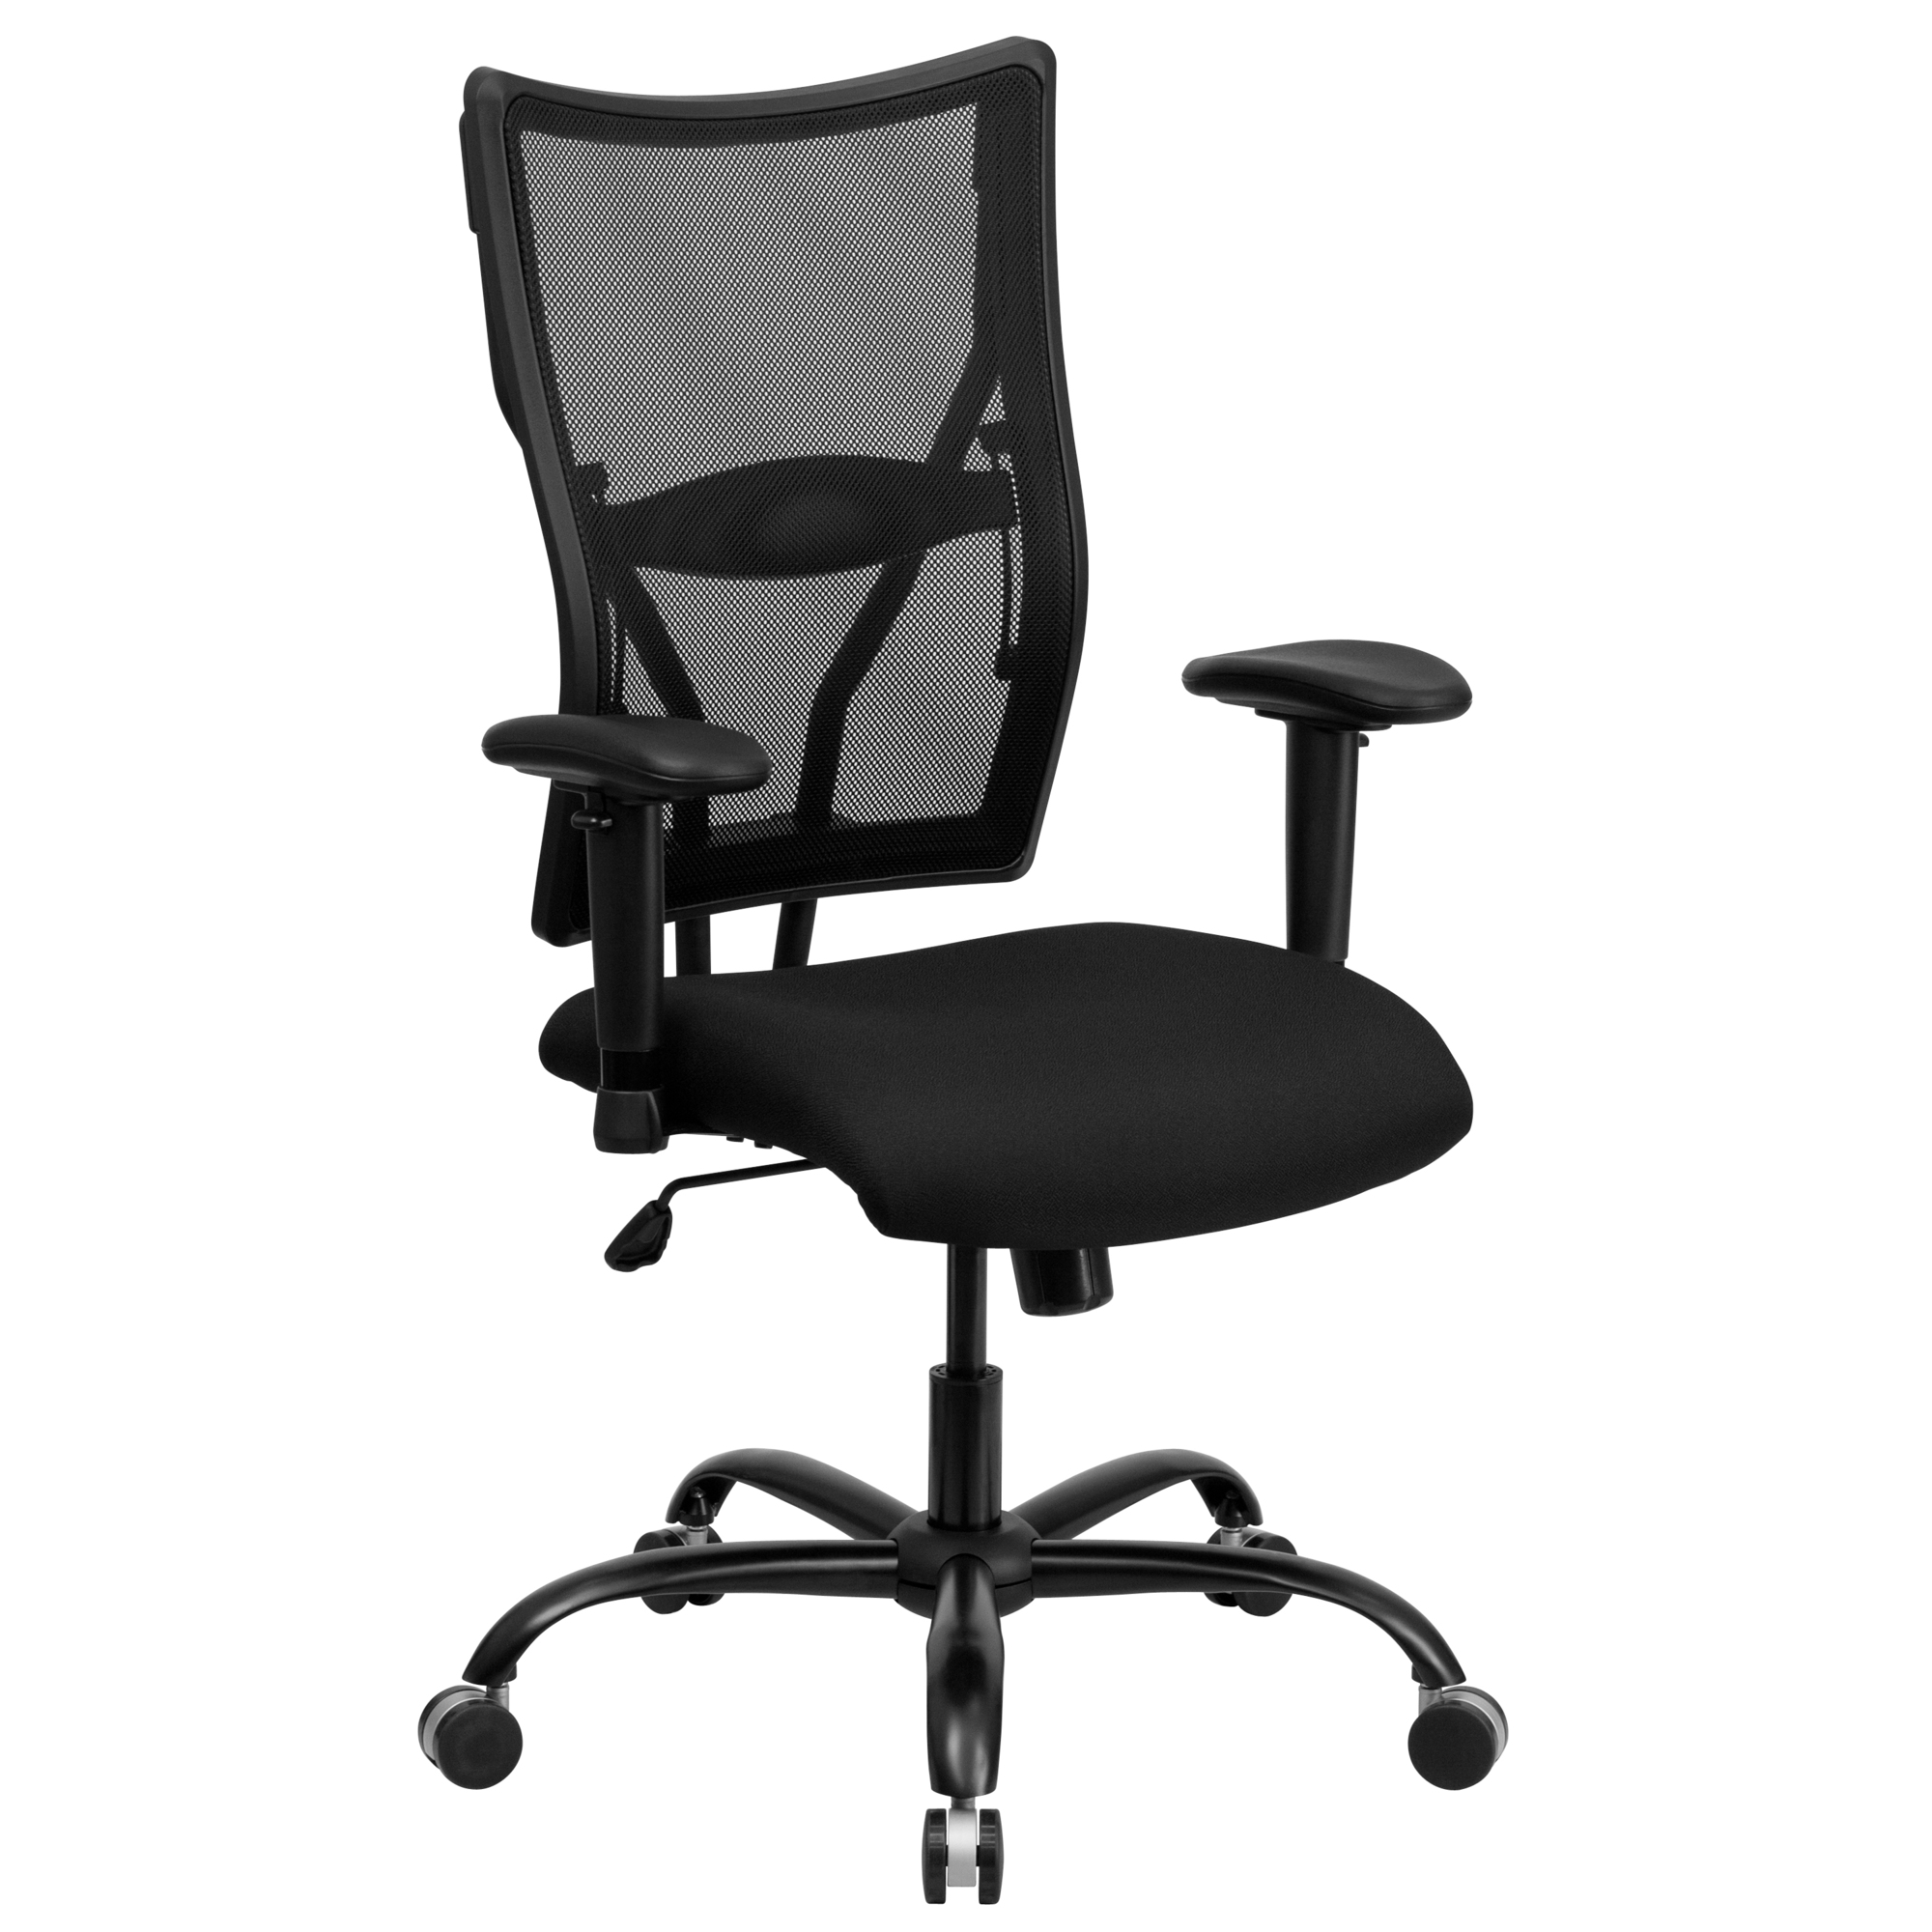 Flash Furniture, Big Tall 400 lb. Rated Black Mesh Chair w/ Arms, Primary Color Black, Included (qty.) 1, Model WL5029SYGA